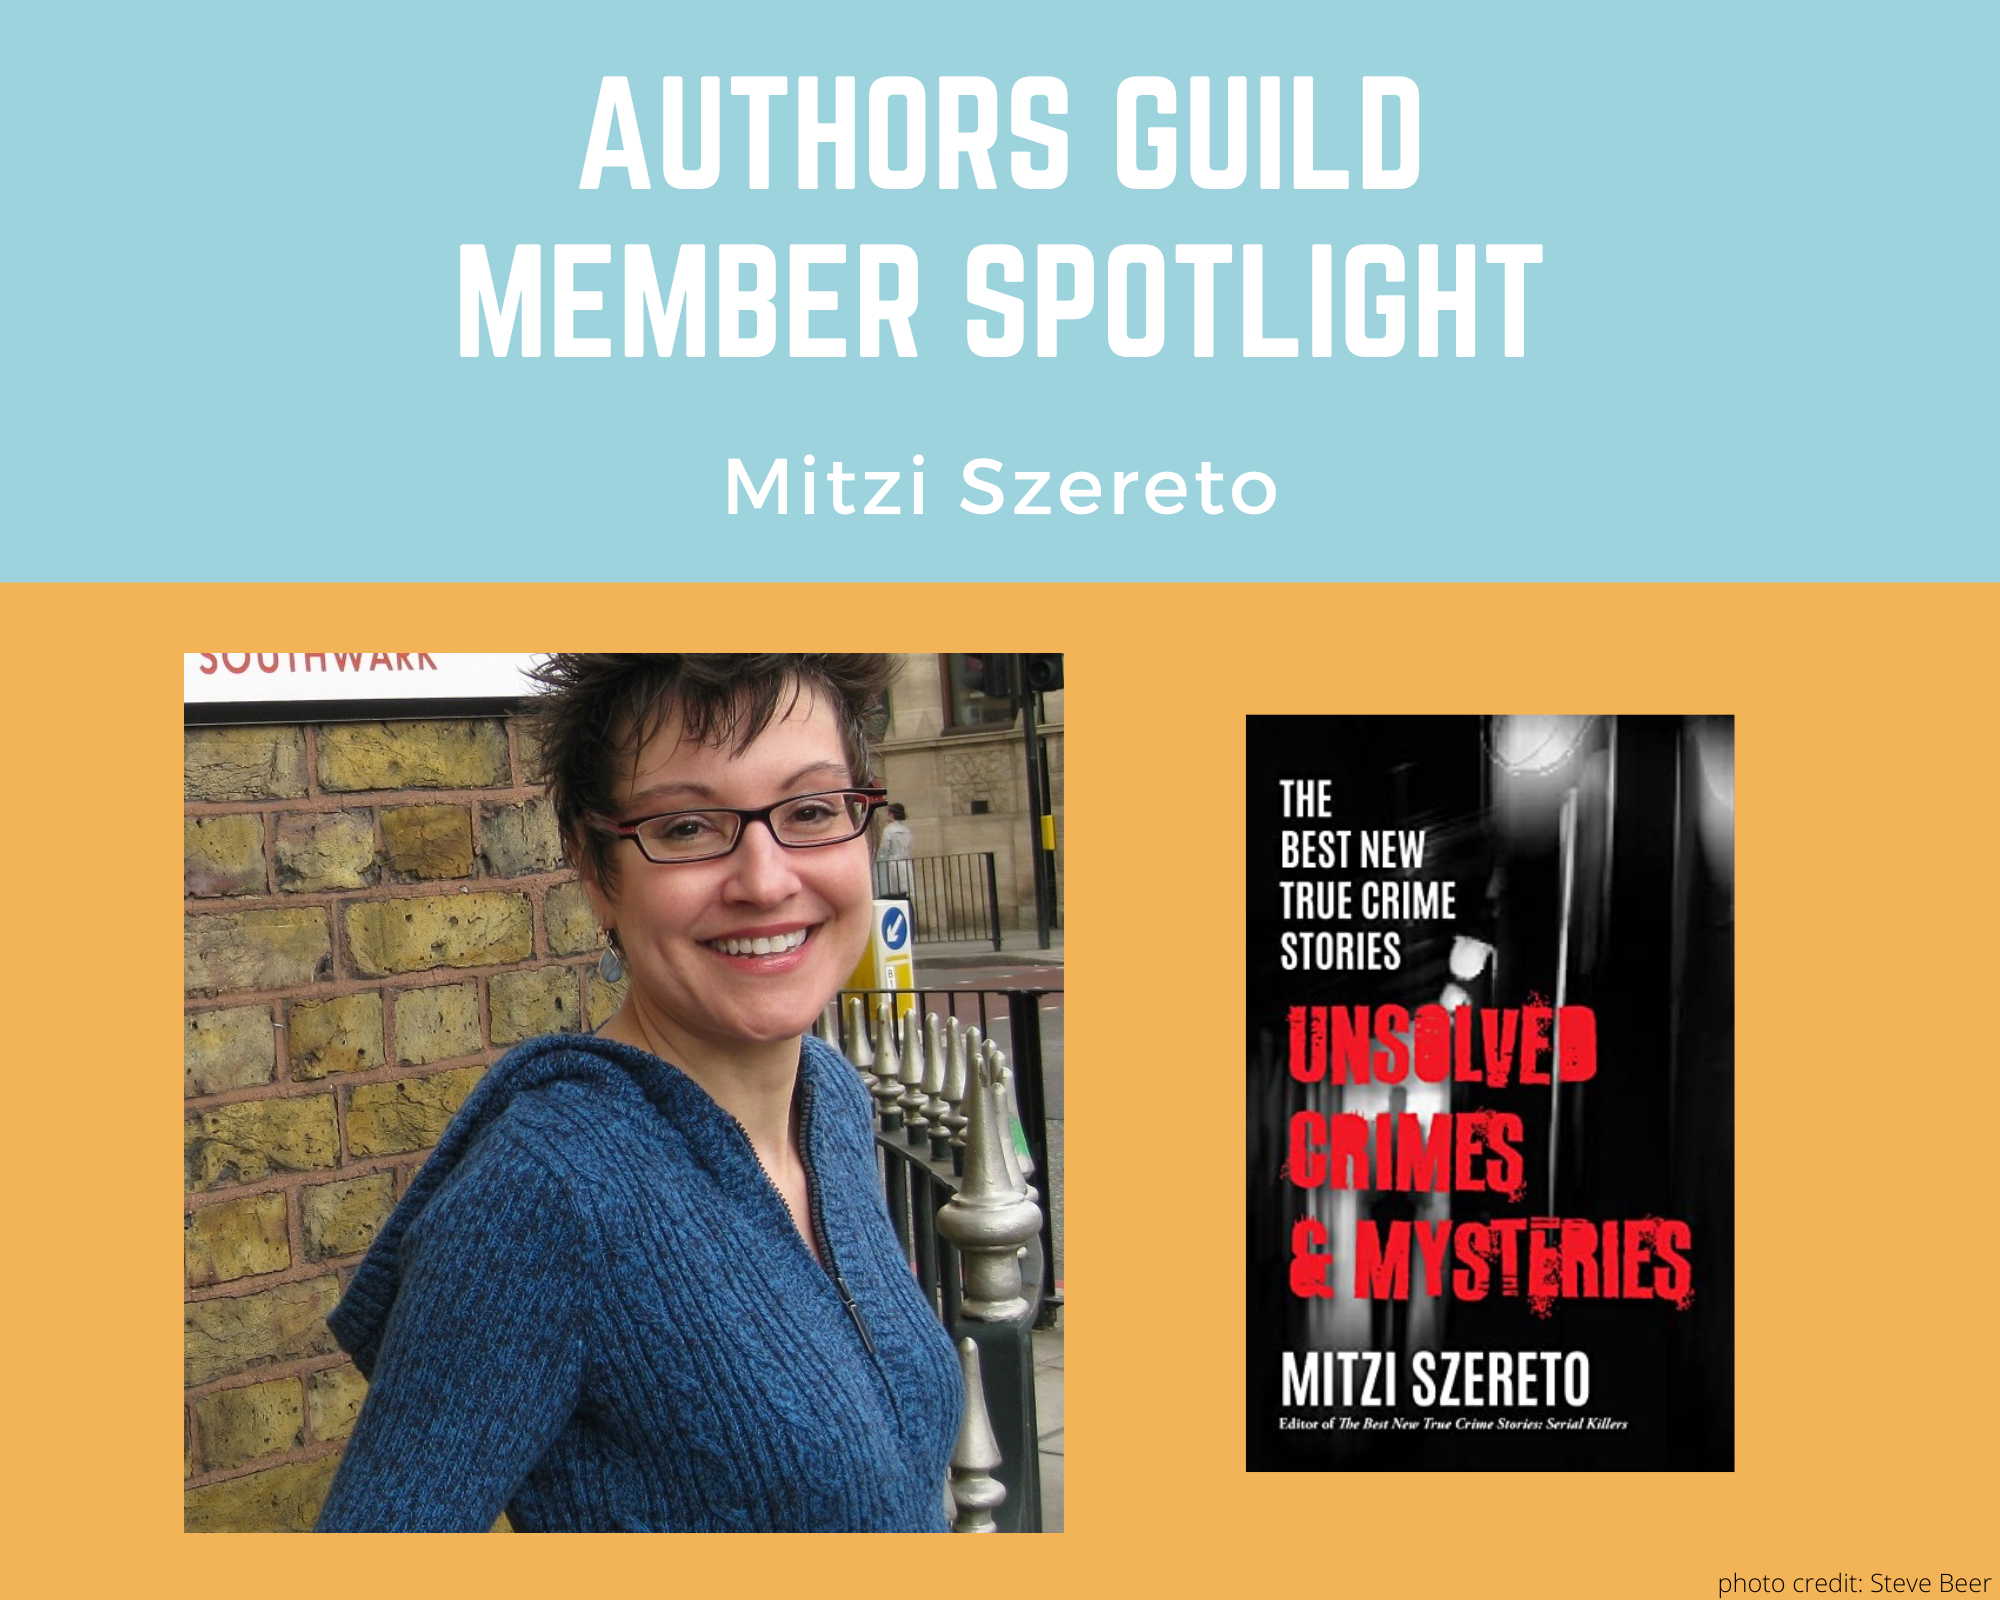 author Mitzi Szereto smiling directly at the camera and an image of her book Unsolved Crimes and Mysteries on a blue and yellow background